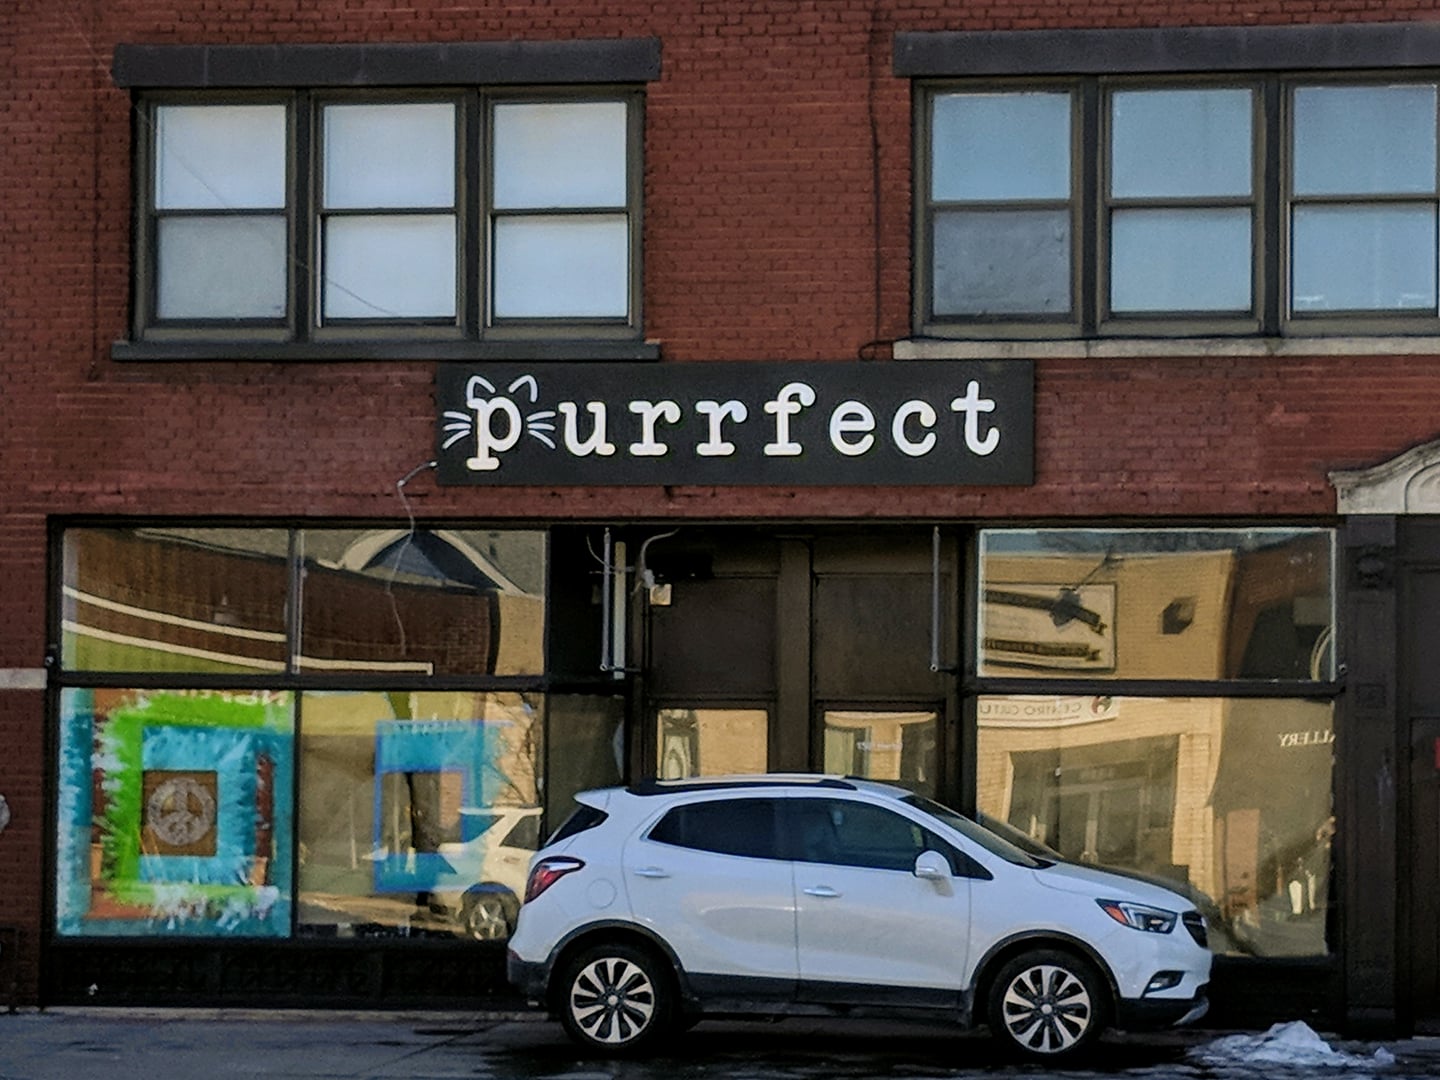 Purrfect Cafe And Gallery Is Best Cat Cafe In Buffalo